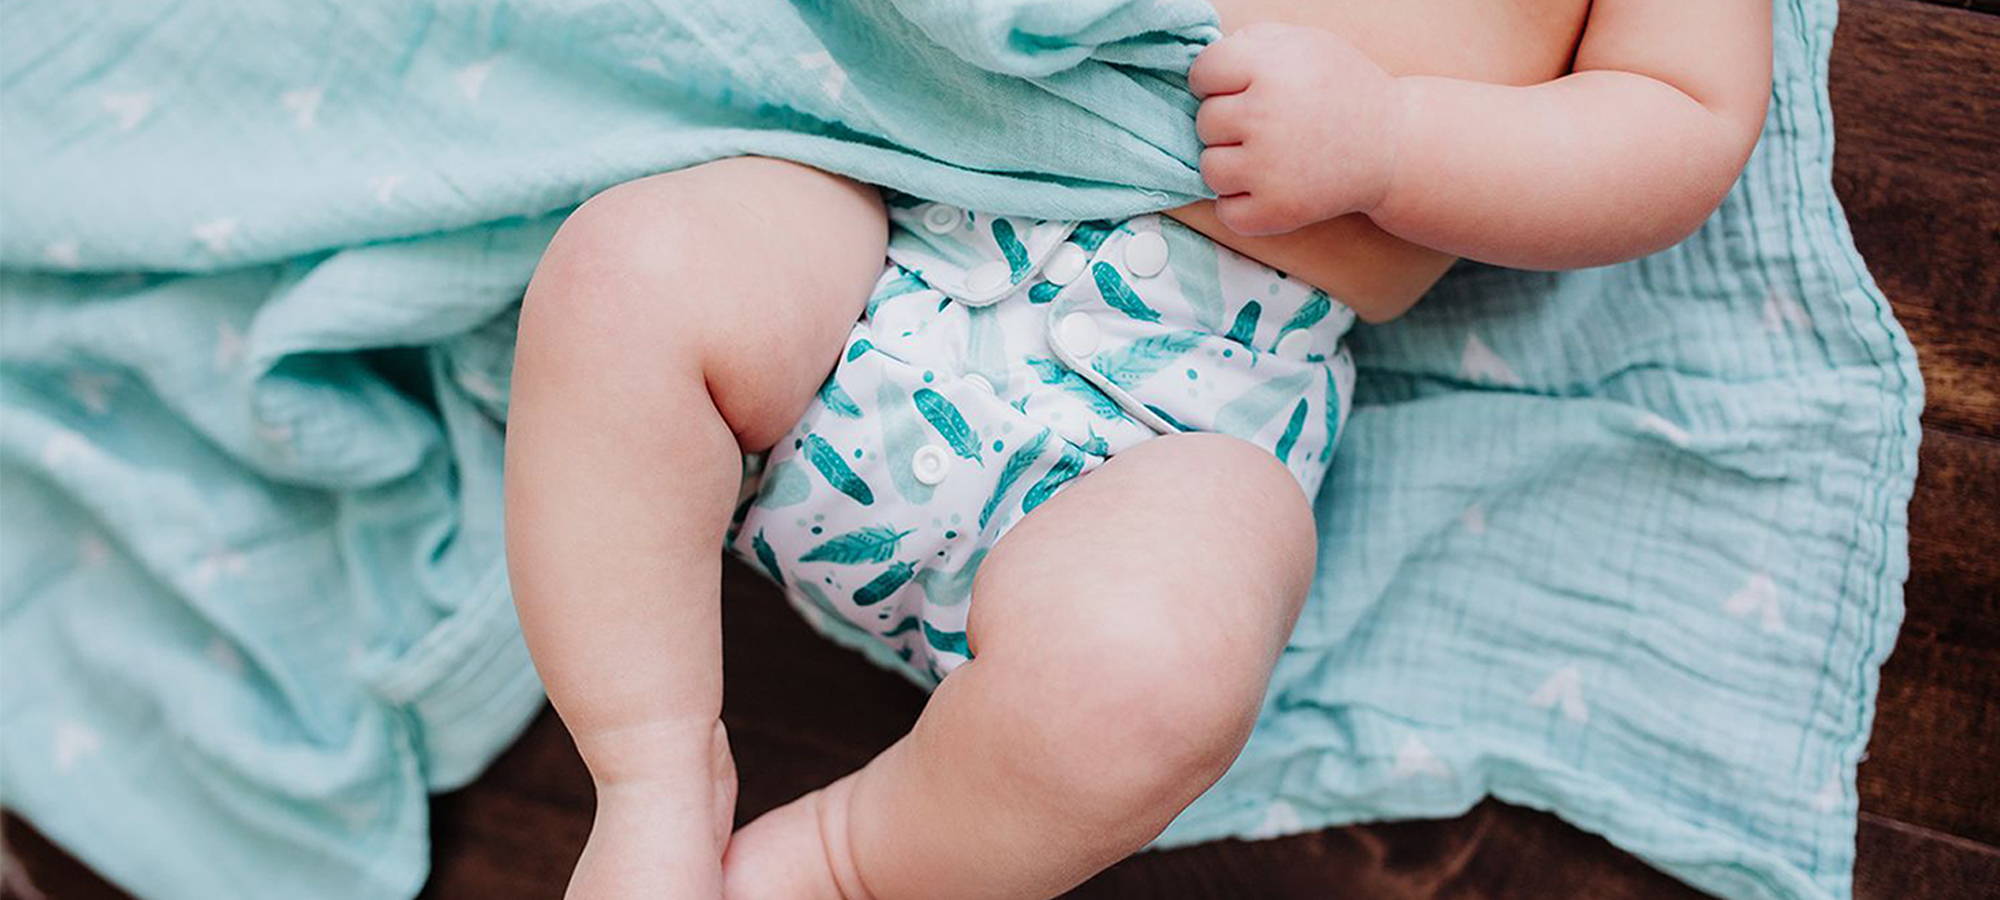 Simple Being safari themed cloth diaper, featuring a a blue and white feather design on our simply comfortable reusable diaper.